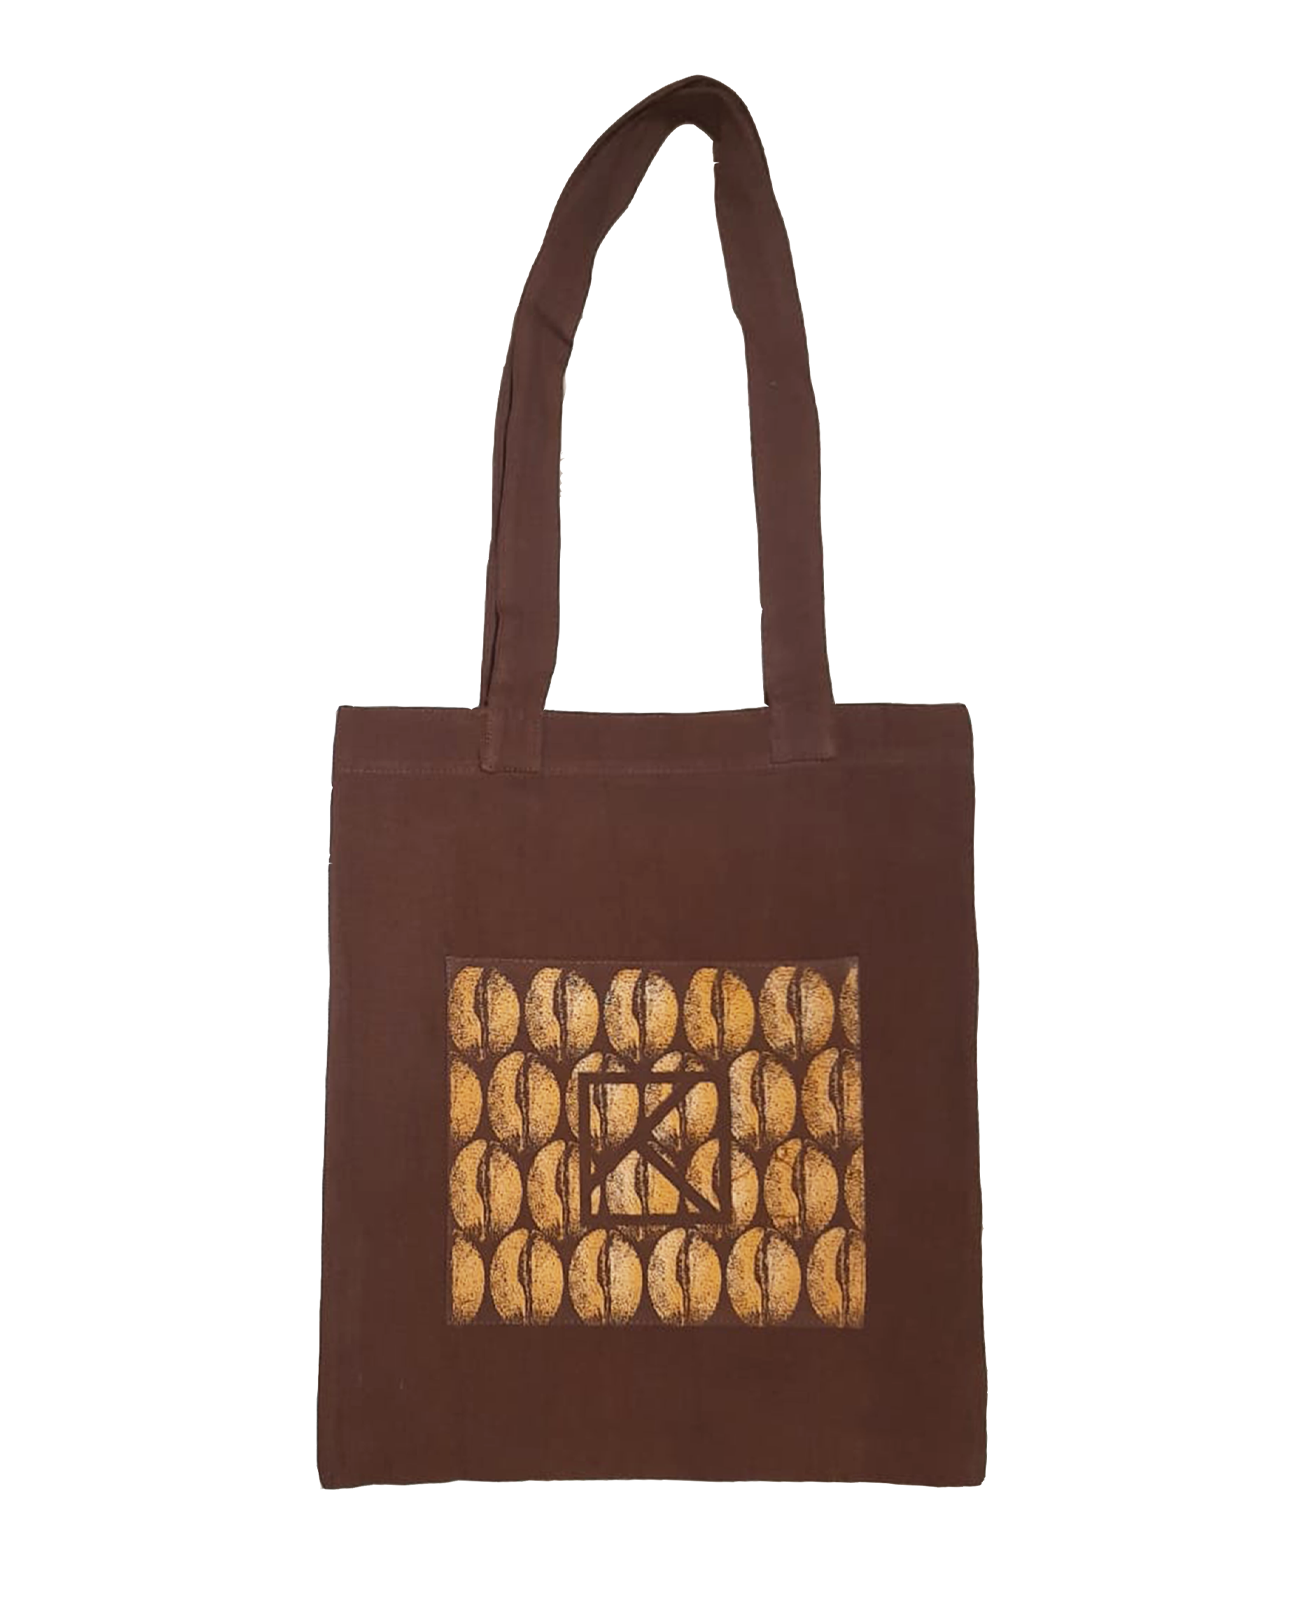 Designer Tote Bags  Tote Bags For Women - KCROASTERS by Koinonia